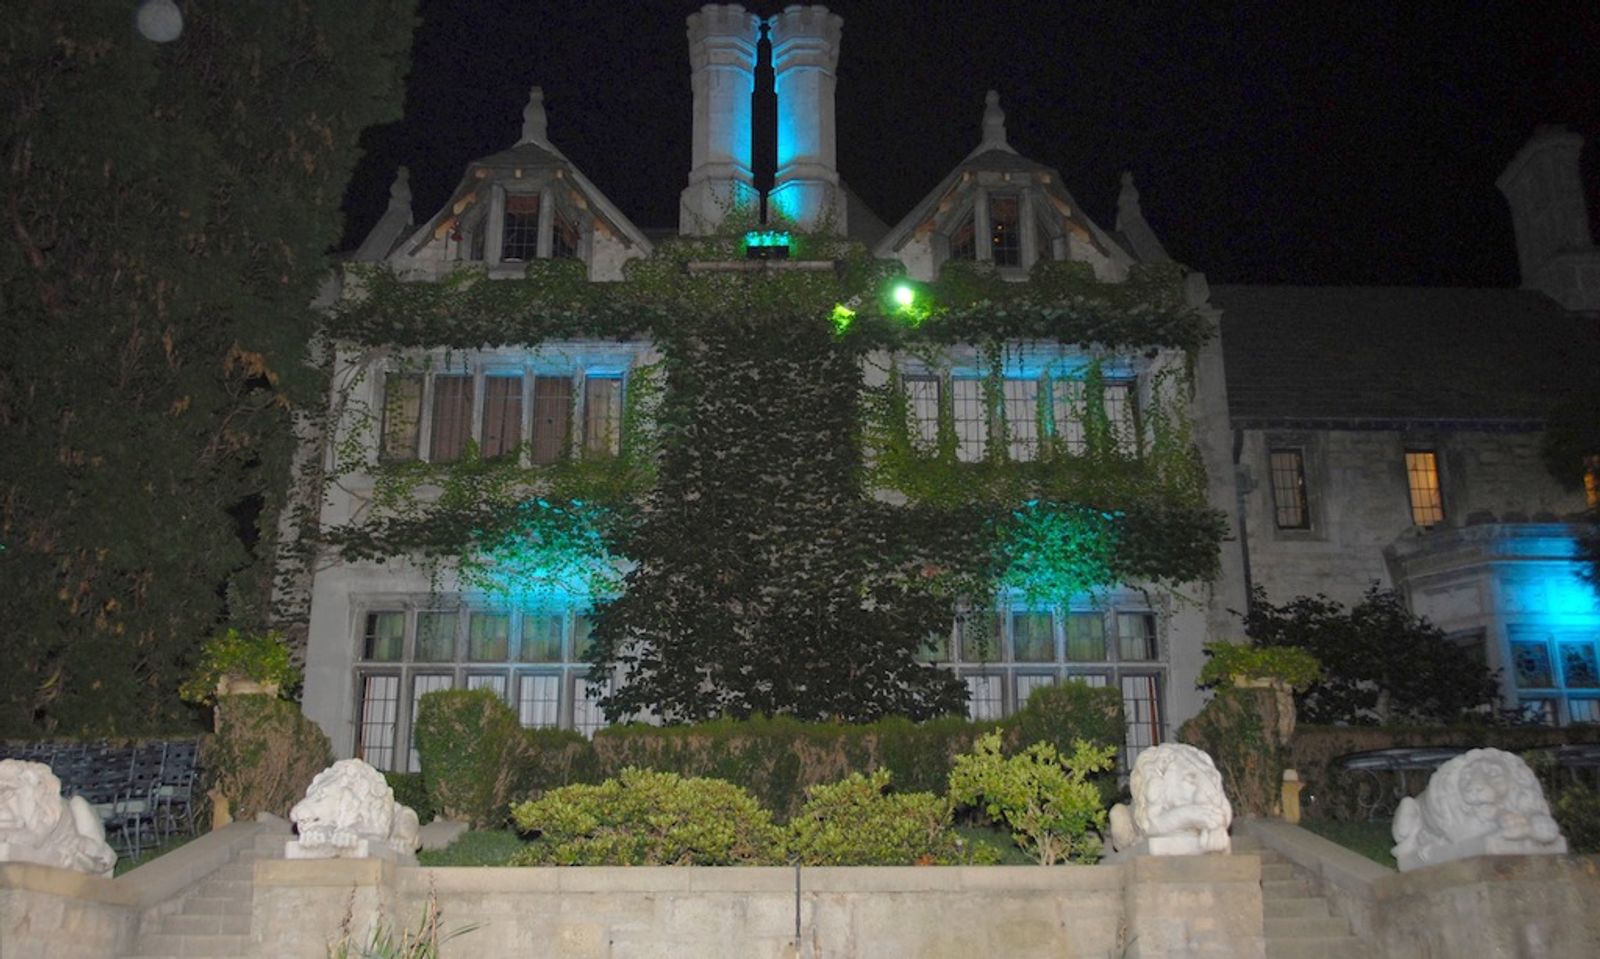 Playboy Mansion Is Haunted, But Not By Ghost of Hef, Ex-GF Says